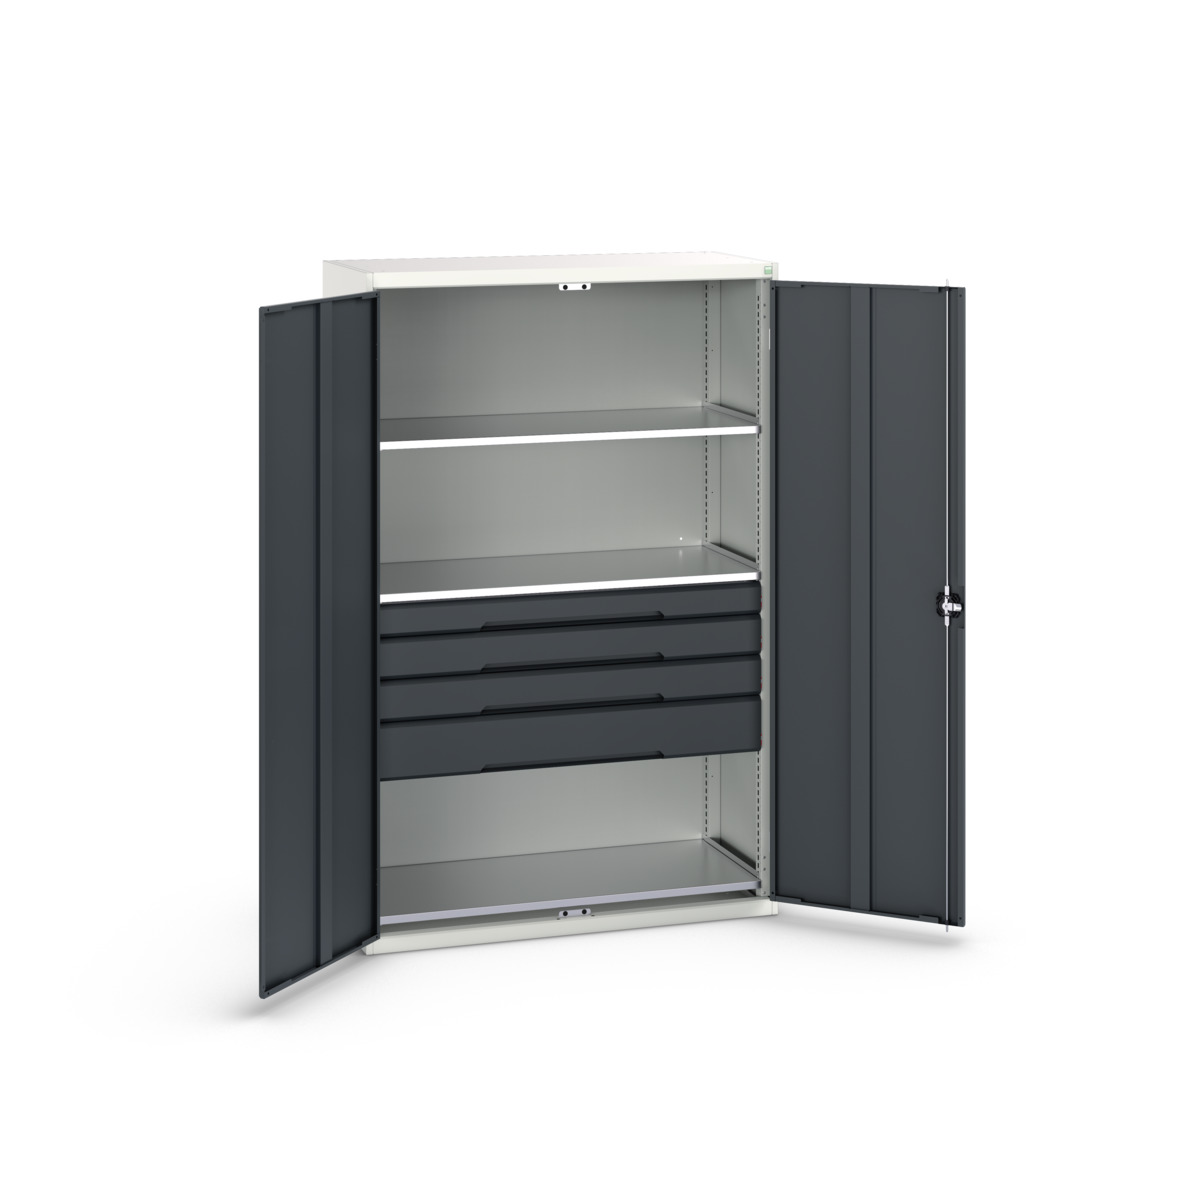 16926656.19 - verso kitted cupboard